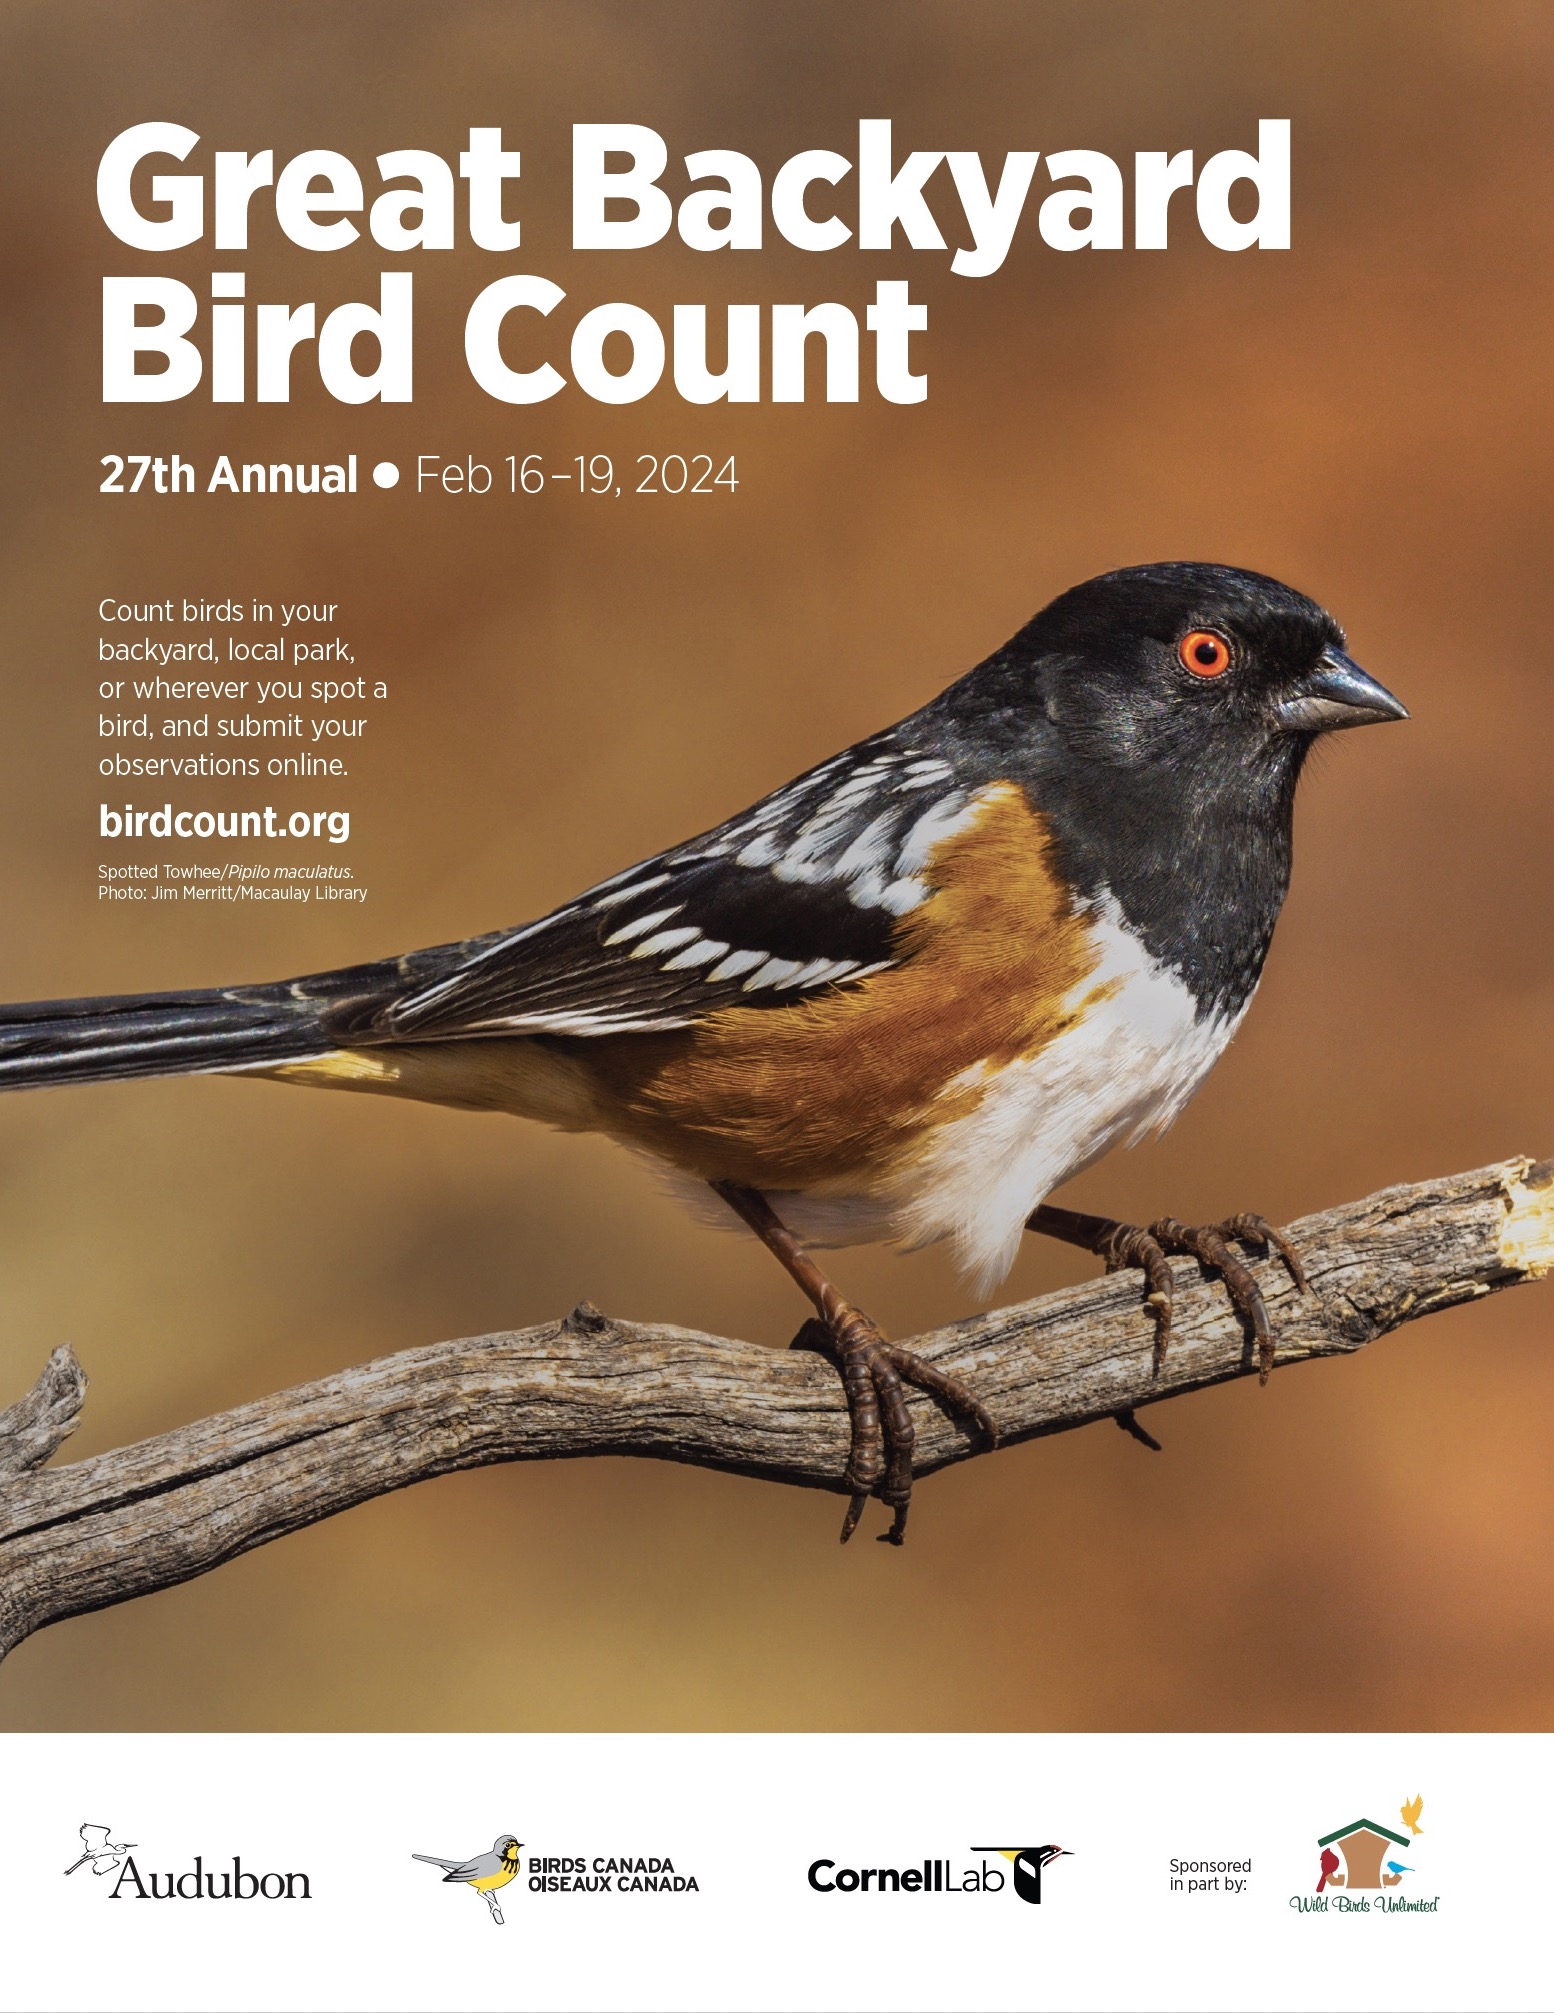 🐦 NATURE NOTES: Join the Great Backyard Bird Count!